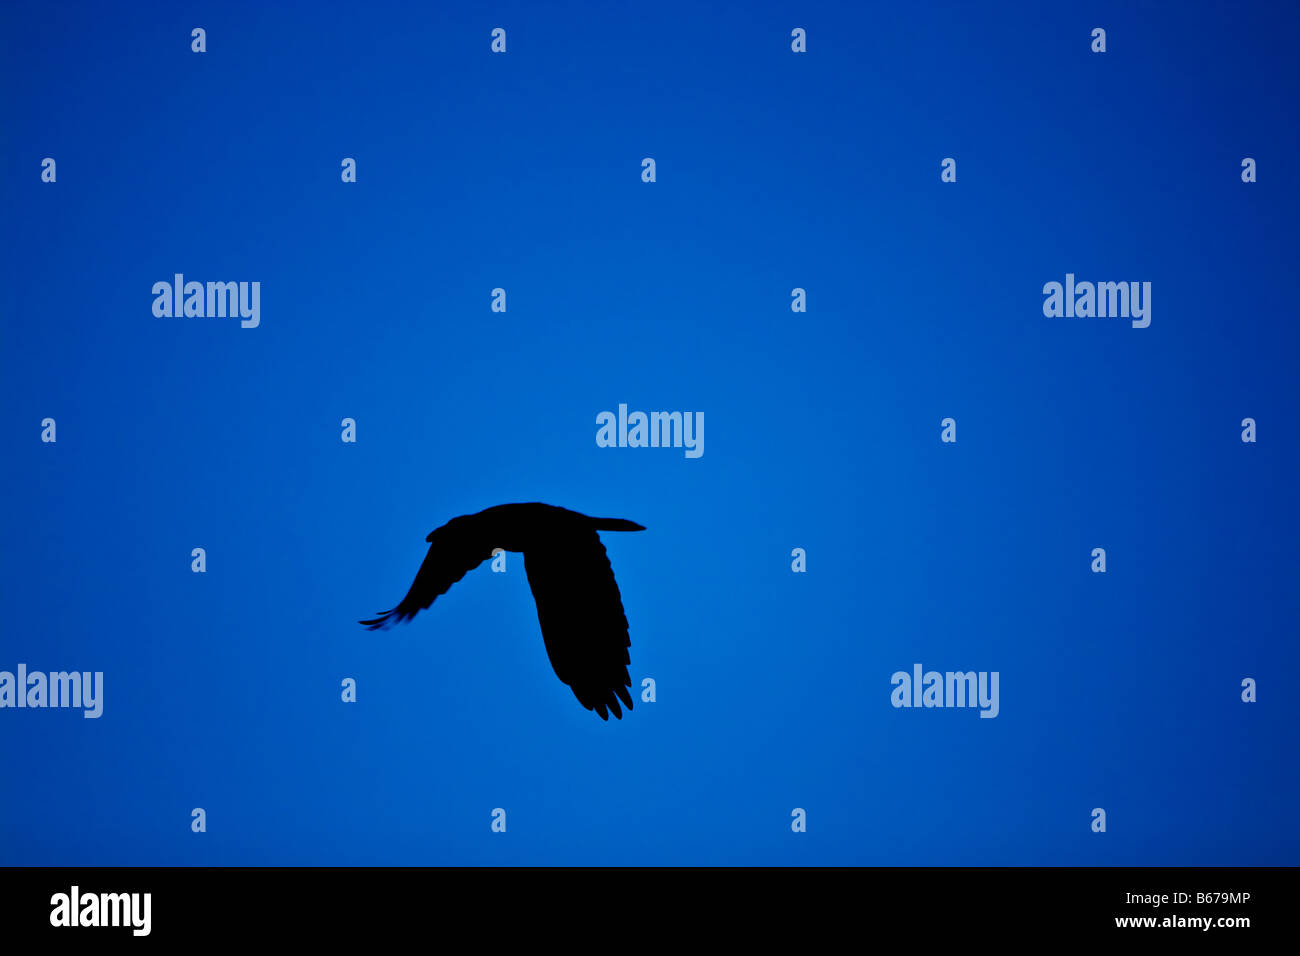 silhouette of a flying bird Stock Photo